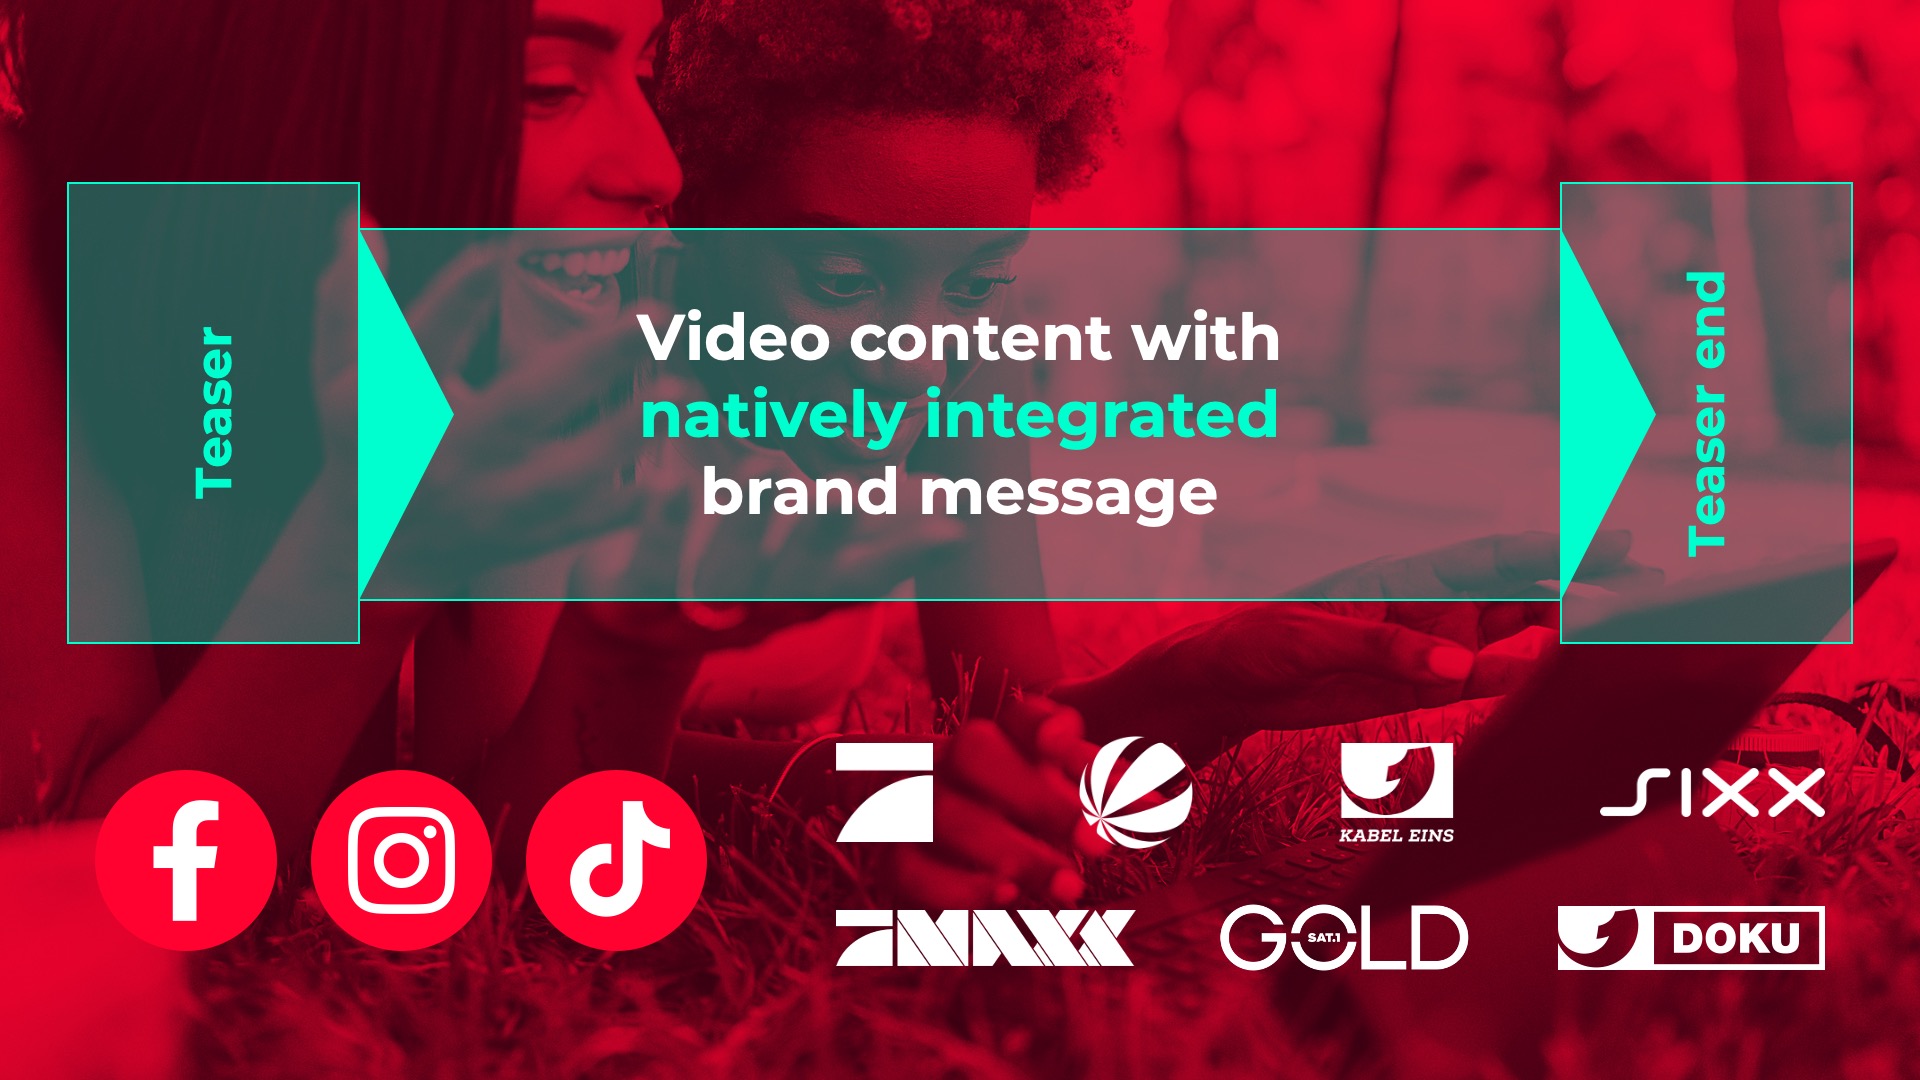 Branded content allows brand messages to be embedded natively in high-quality, high-reach video content from the ProSiebenSat.1 family.